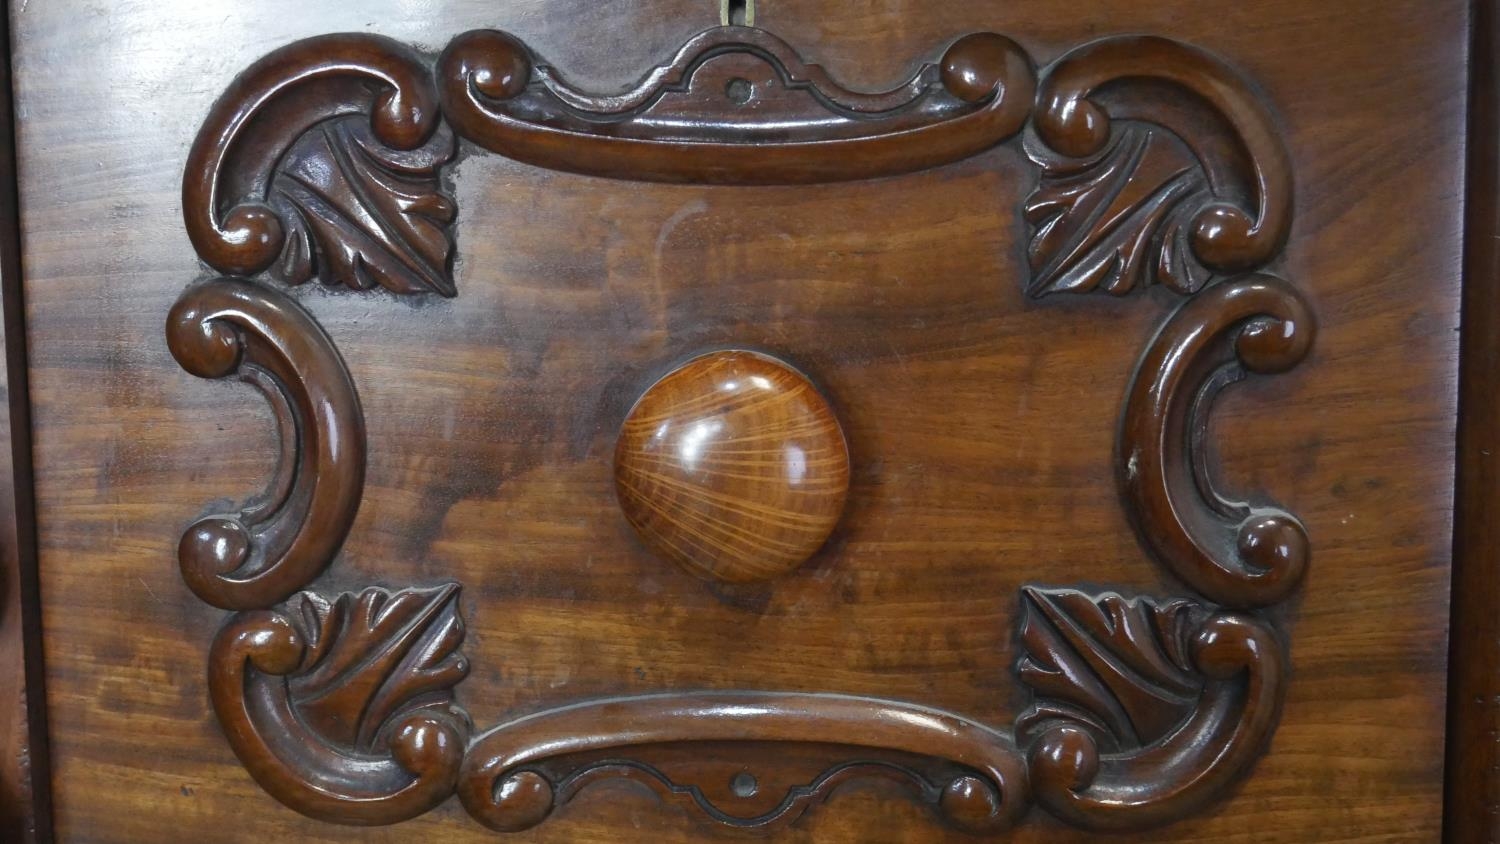 A 19th century mahogany Scottish chest of drawers with and arrangement of drawers flanked by - Image 5 of 7